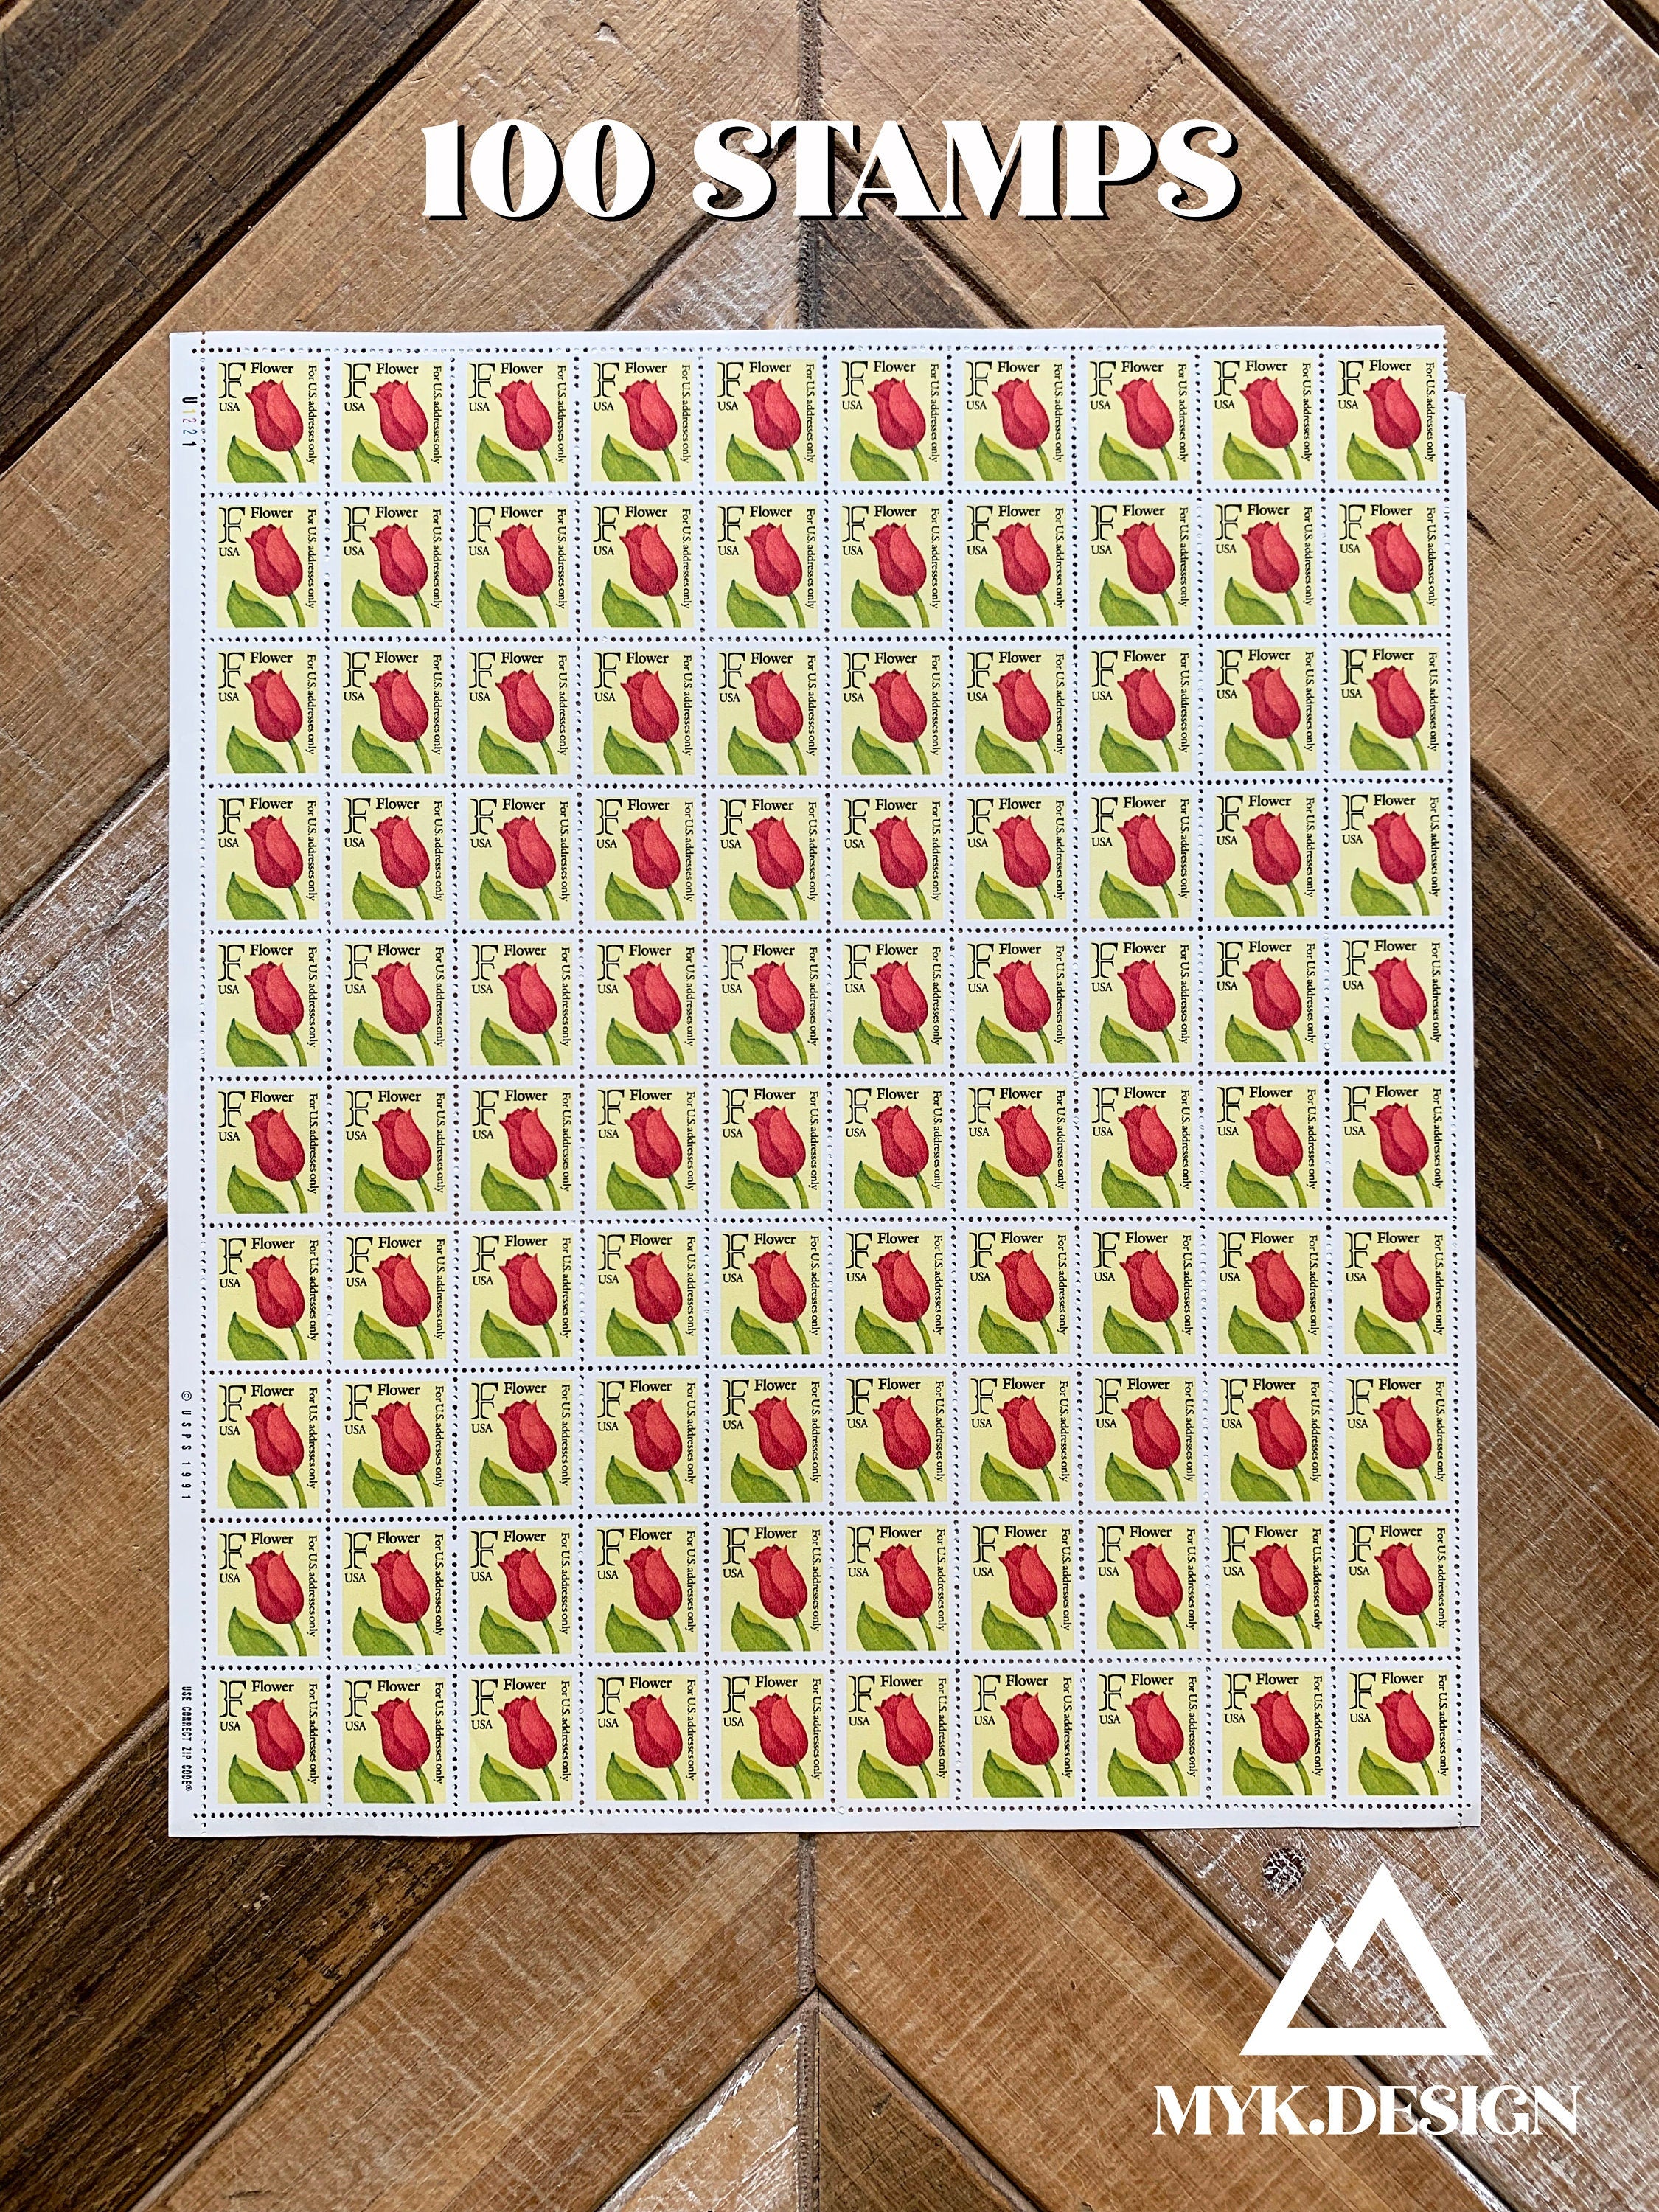 TEN 29c Roses with Dove LOVE Stamps .. Unused US Postage Stamps | Love  Stamp | Red Roses | Wedding Postage | Valentine | Love Letters Mail